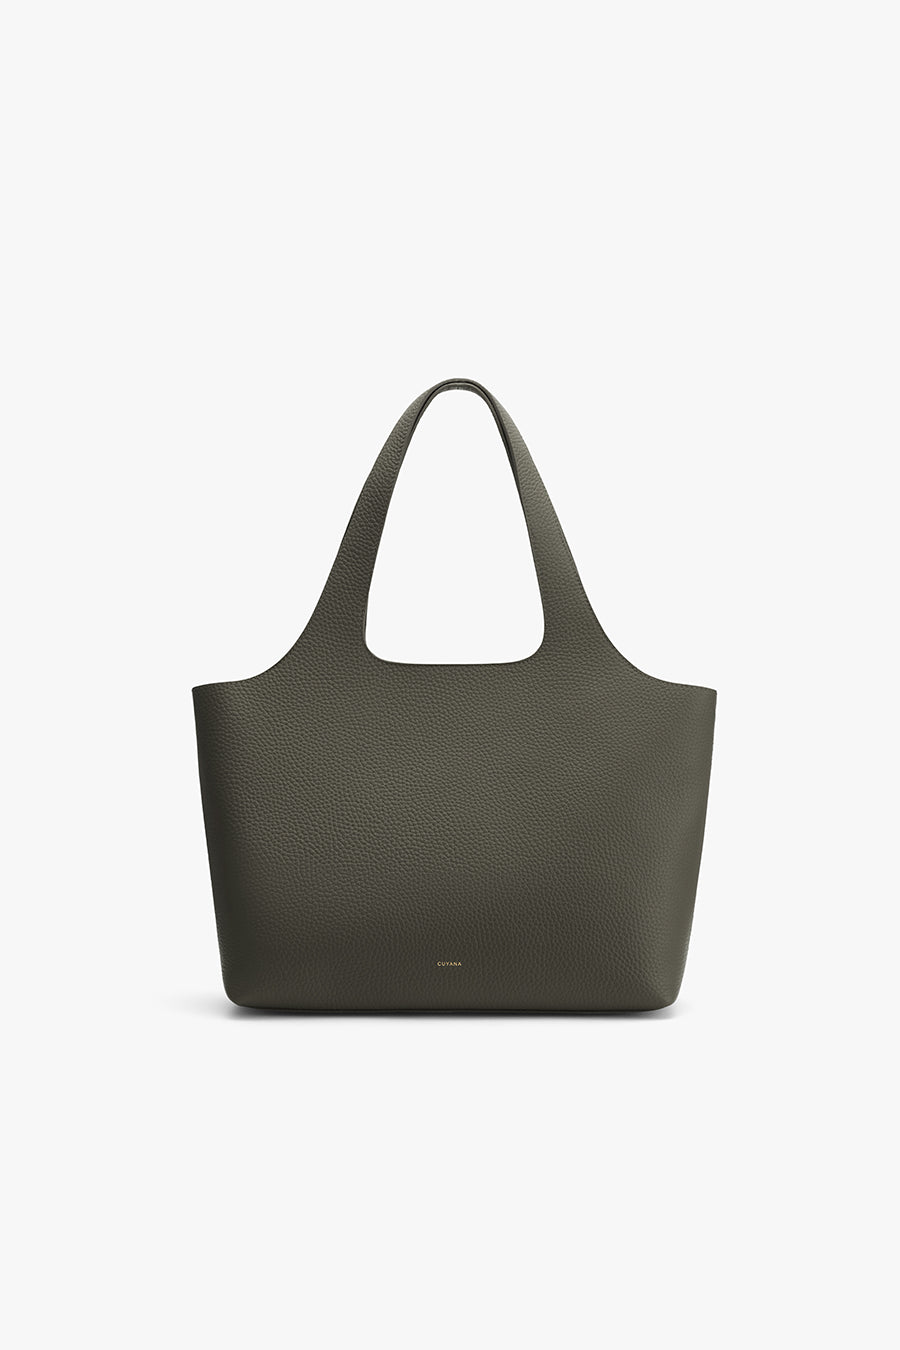 Cuyana Revive - System Tote